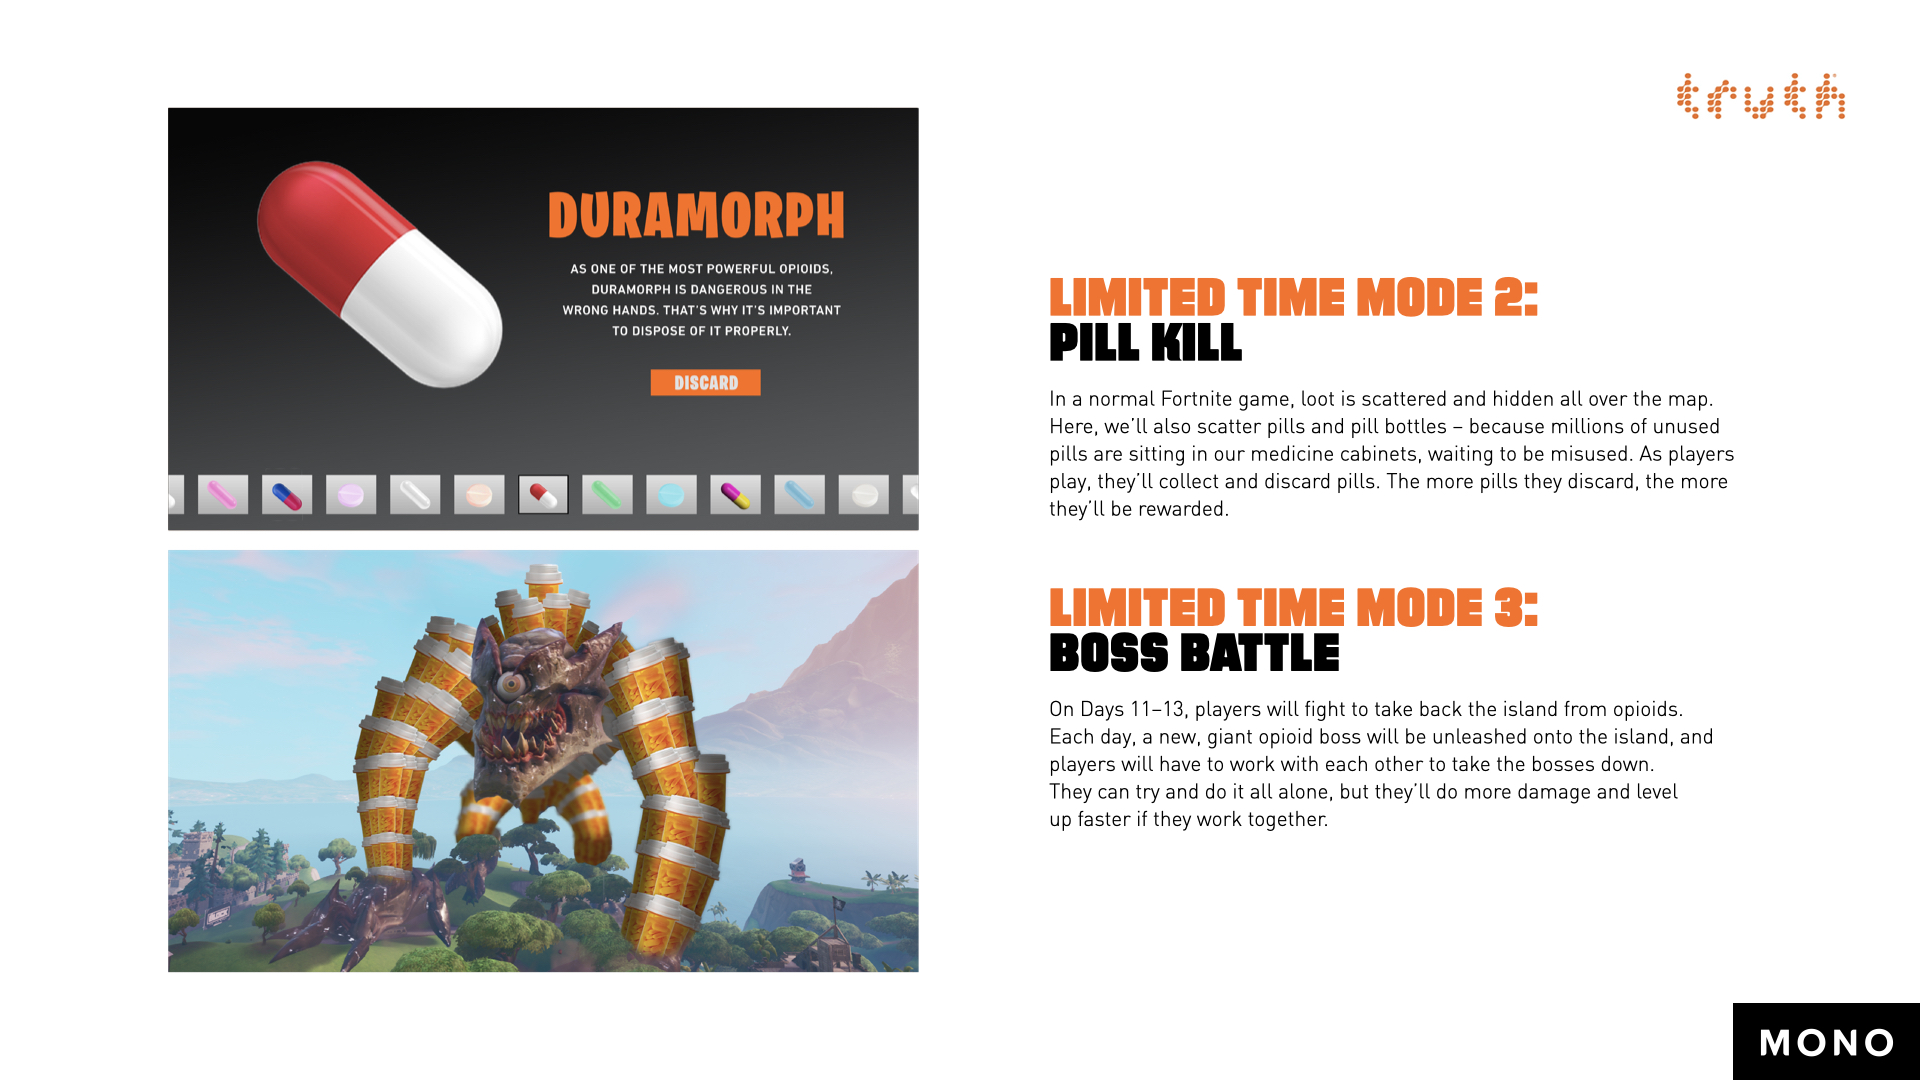 Limited Time Mode 2: Pill Kill. In a normal Fortnite game, loot is scattered and hidden all over the map. Here, we’ll also scatter pills and pill bottles – because millions of unused pills are sitting in our medicine cabinets, waiting to be misused. As players play, they’ll collect and discard pills. The more pills they discard, the more they’ll be rewarded. Limited Time Mode 3: Boss Battle. On Days 11 through 13, players will fight to take back the island from opioids. Each day, a new, giant opioid boss will be unleashed onto the island, and players will have to work with each other to take the bosses down. They can try and do it all alone, but they’ll do more damage and level up faster if they work together.